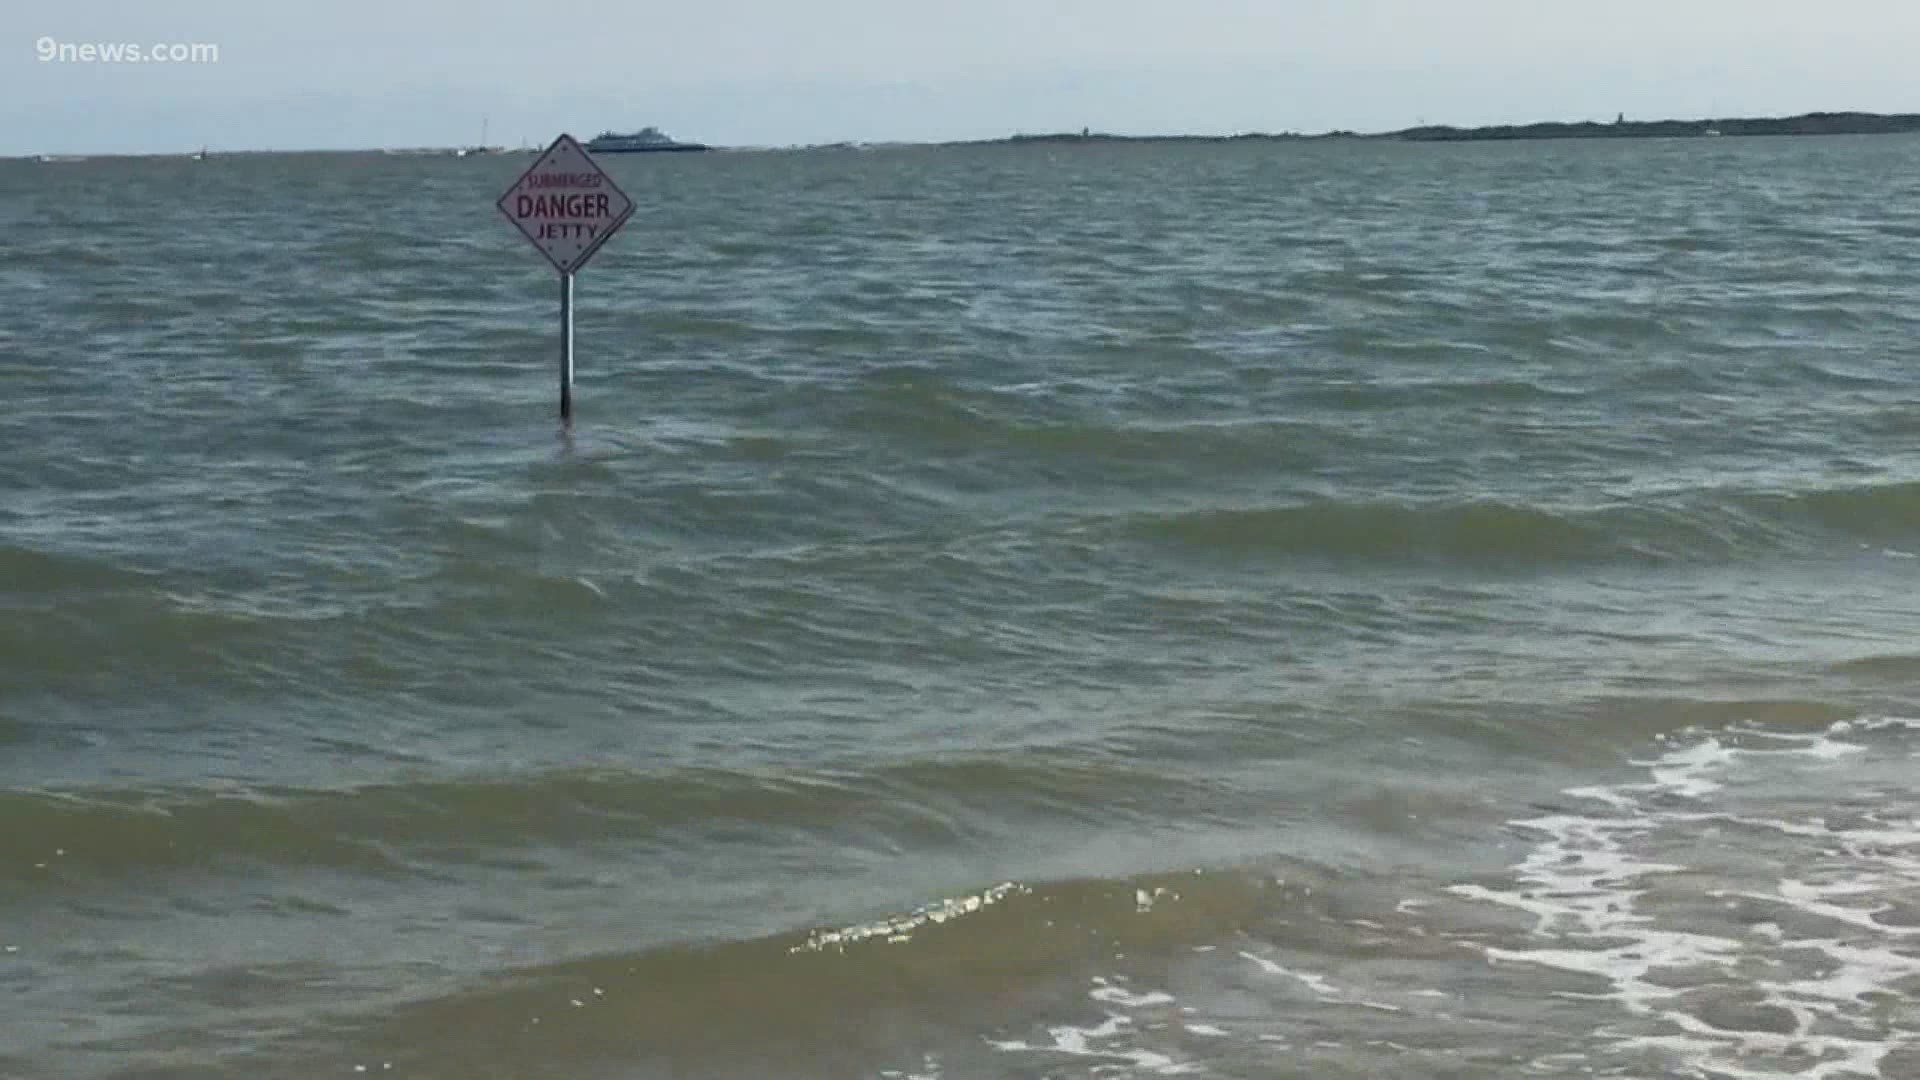 Scientists are projecting sea levels to rise 2-3 feet by 2100.